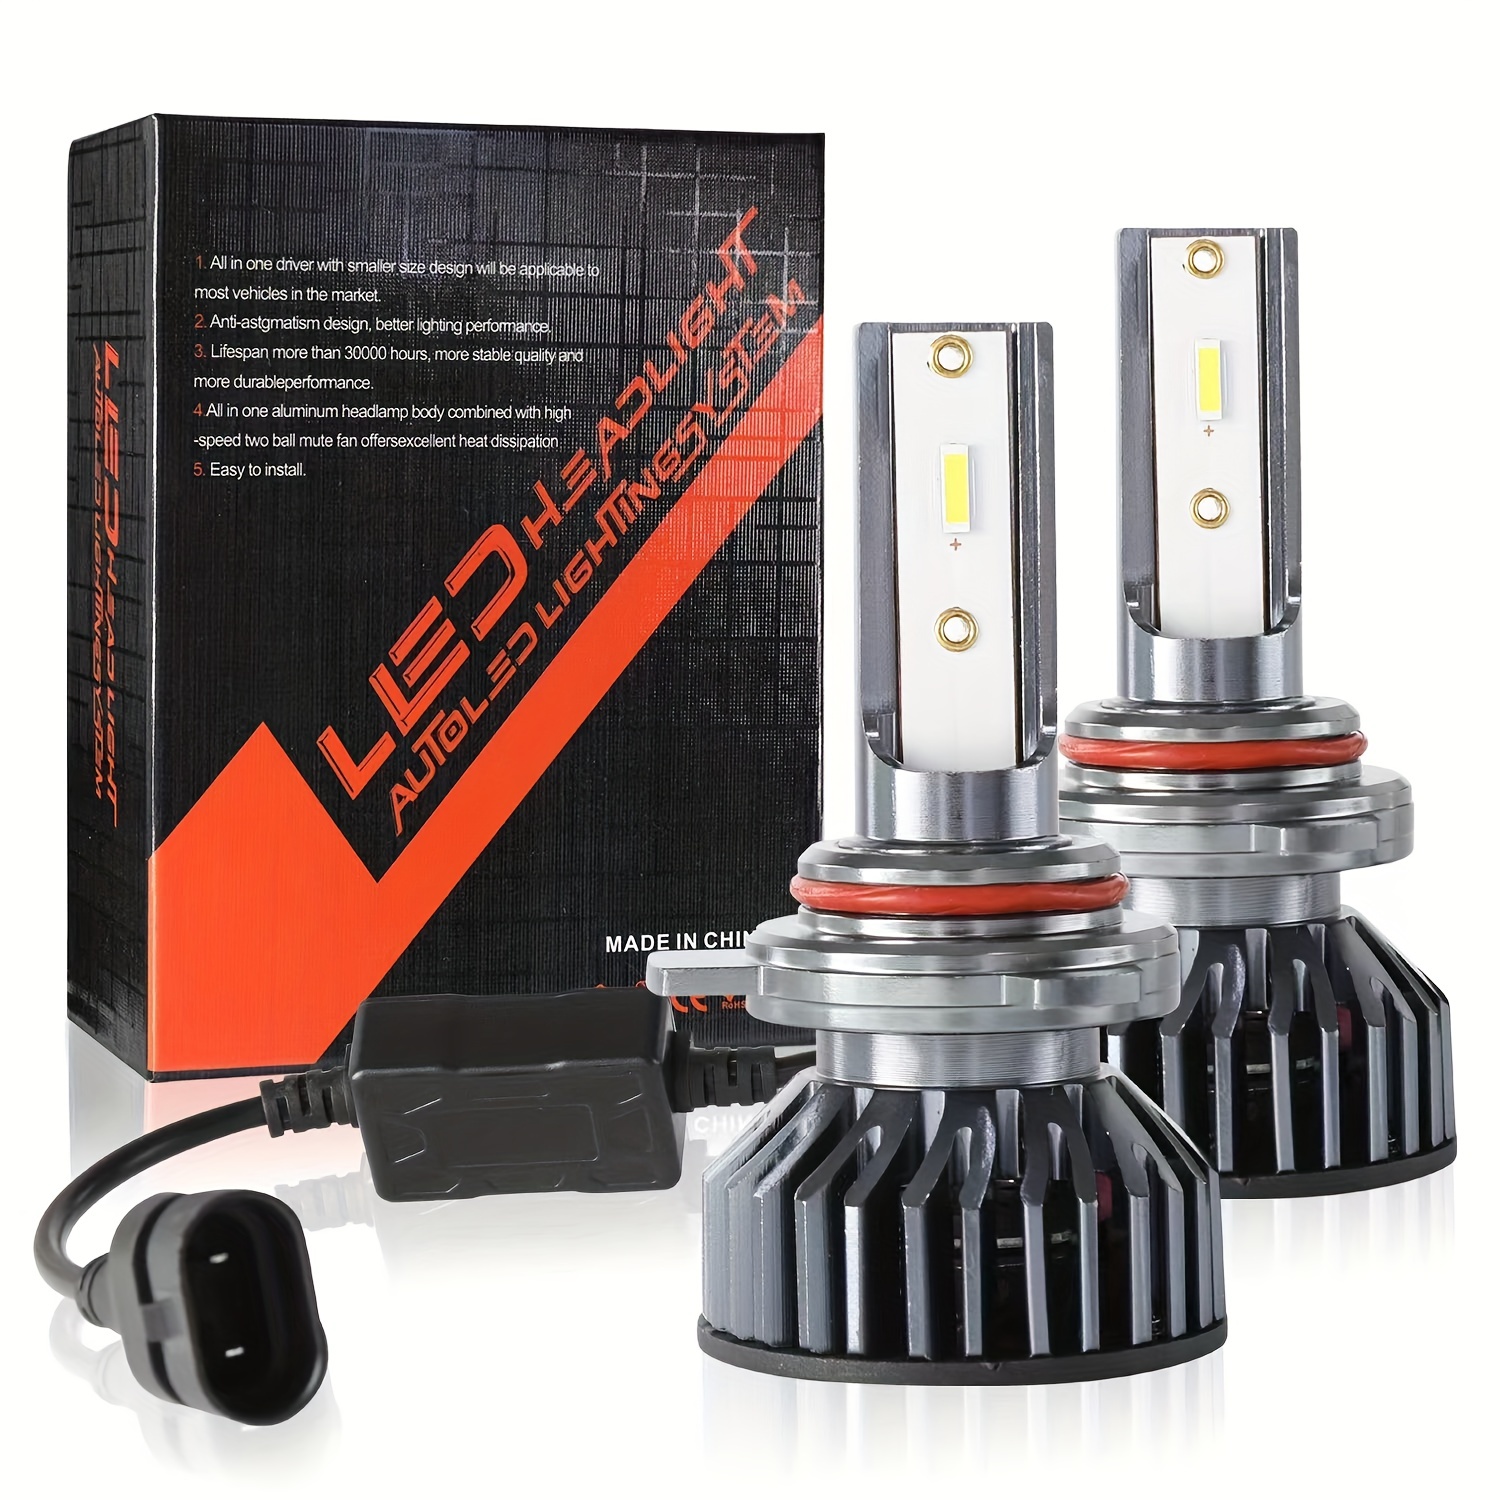 H7 Led Headlights Bulbs 100w Super Bright For Auto H1 H4 H11 9006 9012 5570  Csp Chips 4300k 6000k Extremely High Power Car Light